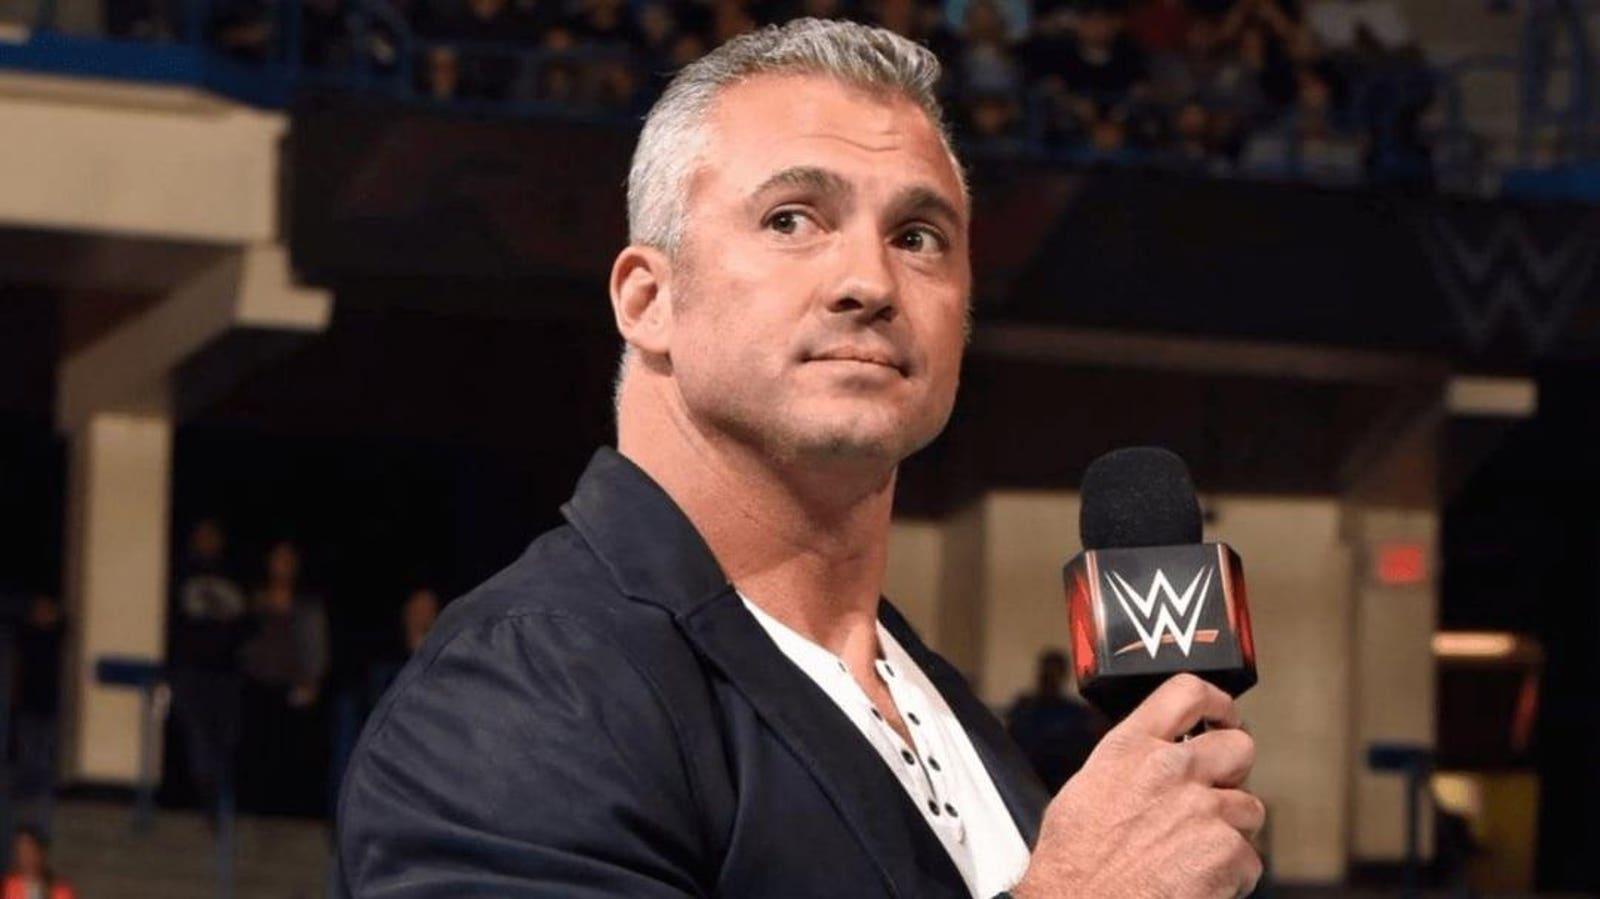 Shane McMahon In AEW Is A Disaster They Could Use Right Now